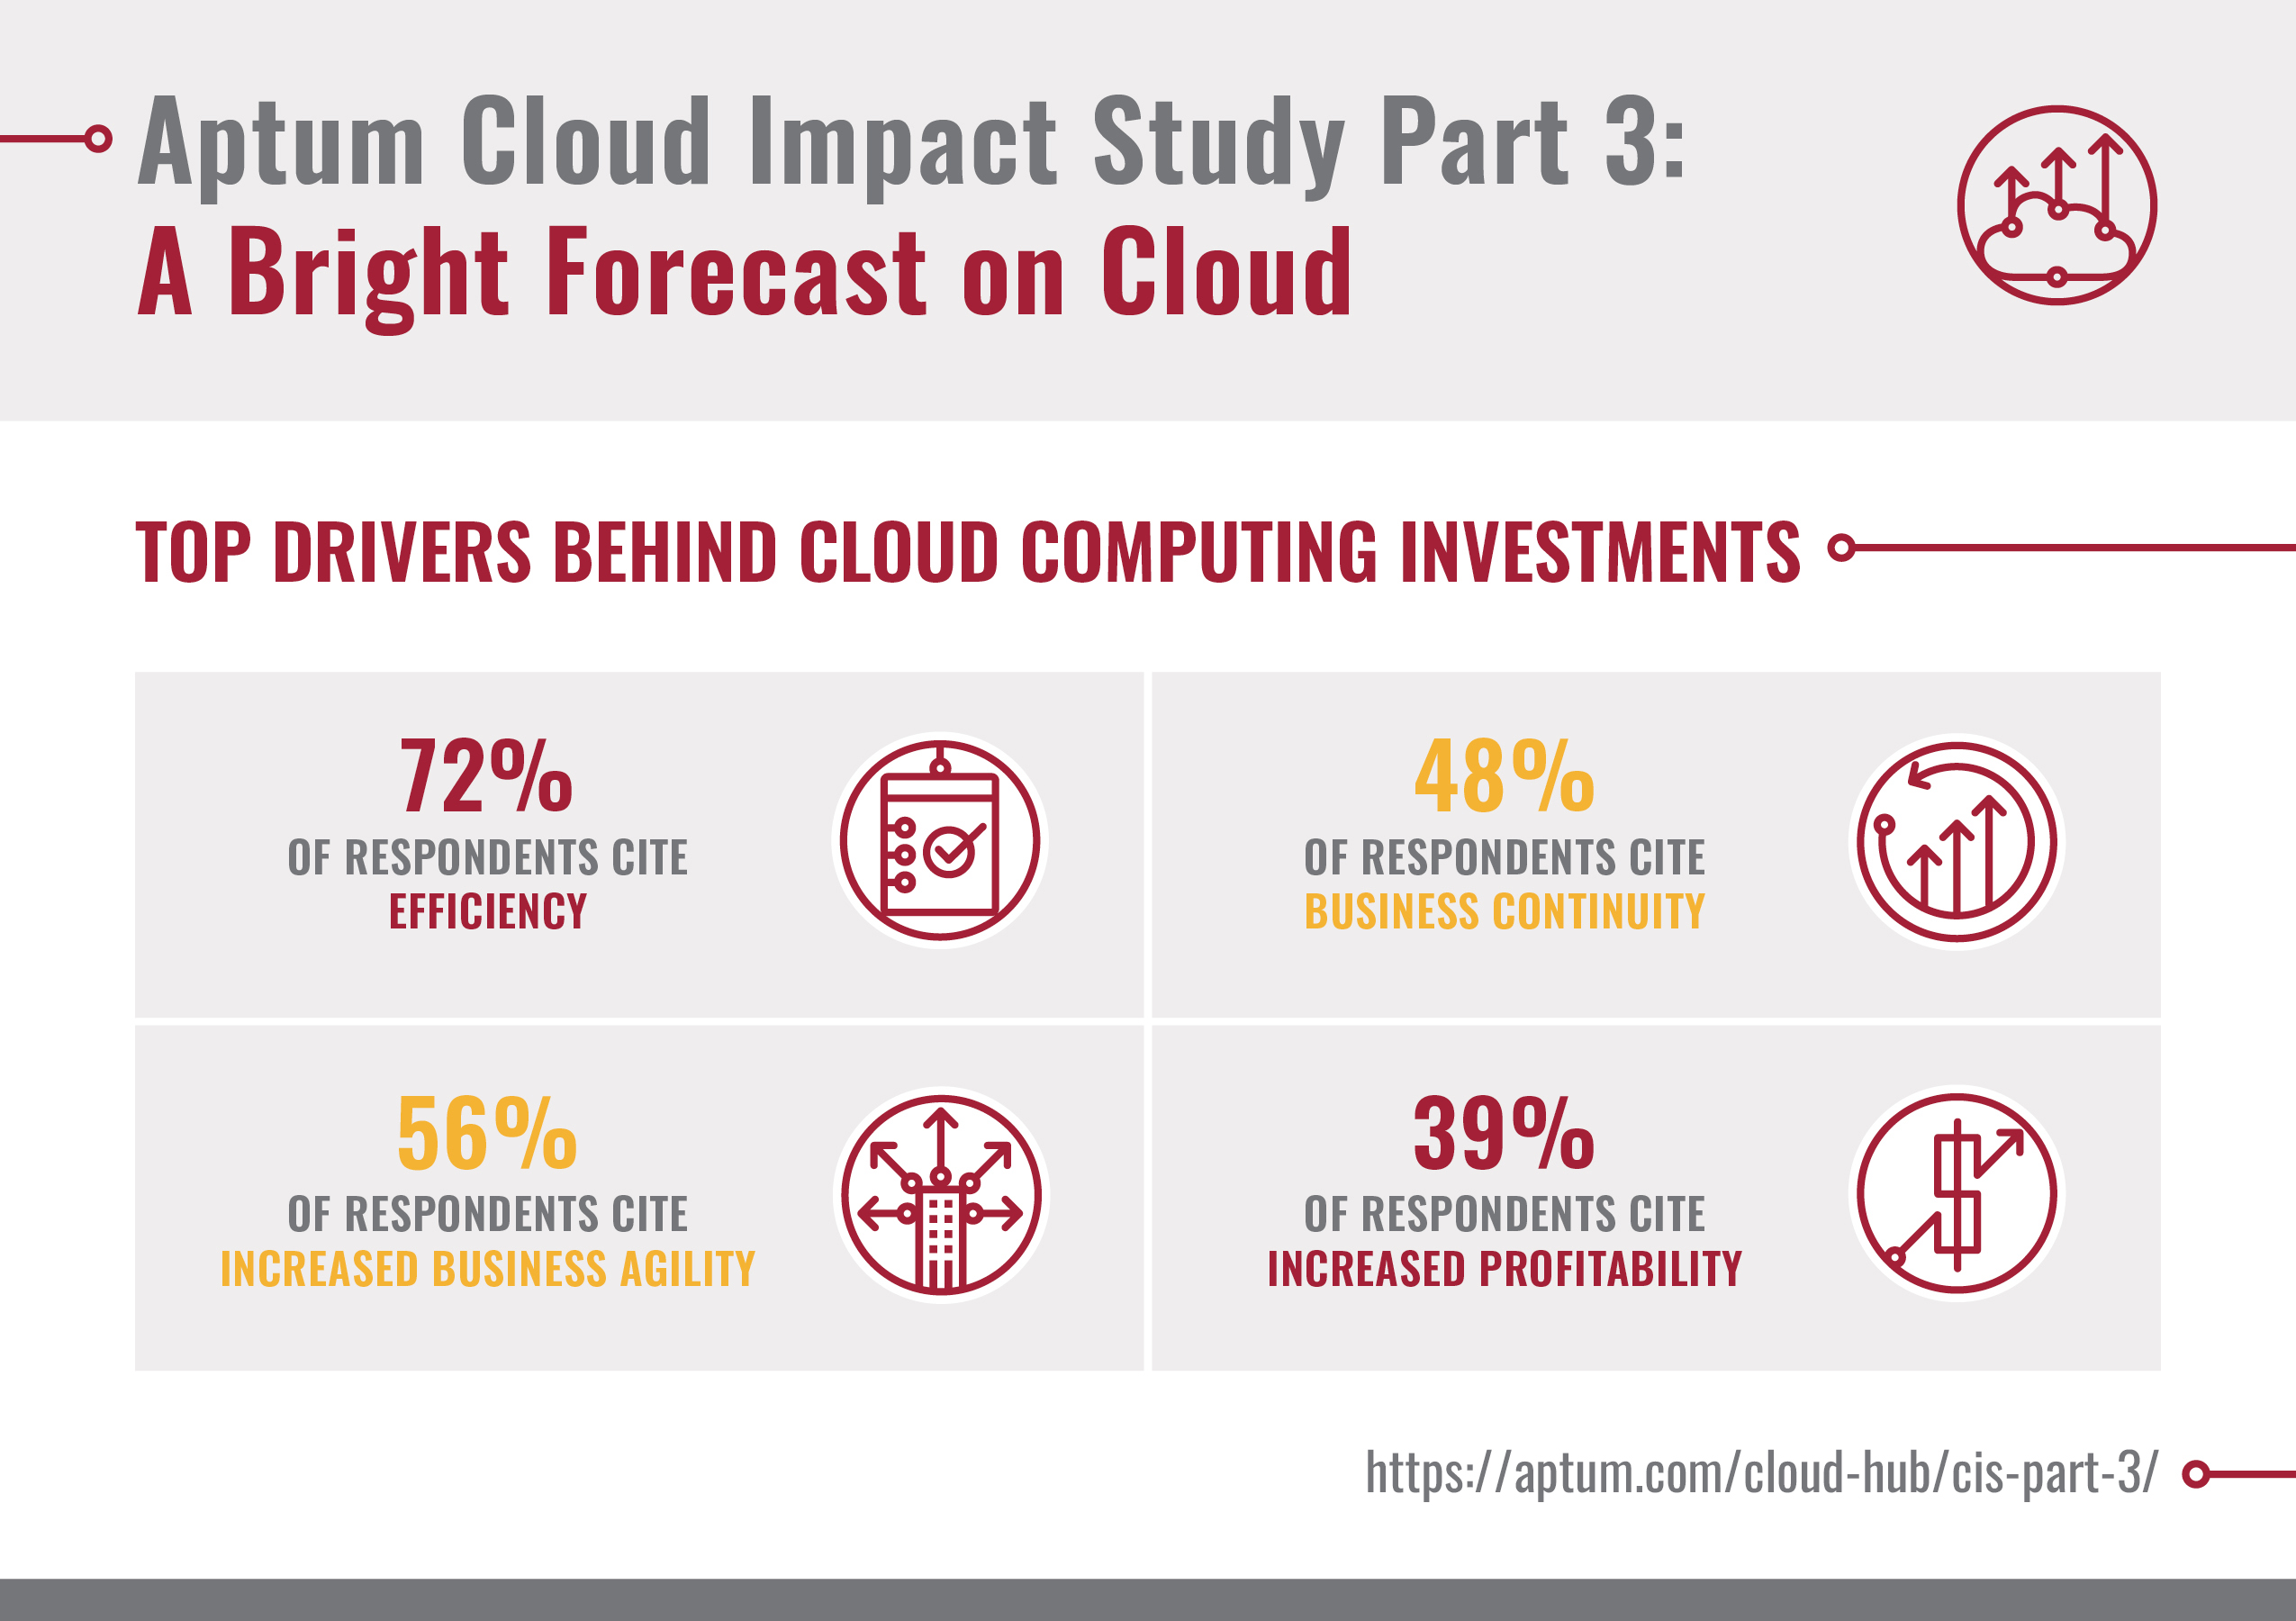 Image linking to Part 3 of the Aptum Cloud Impact Study - A Bright Forecast on Cloud